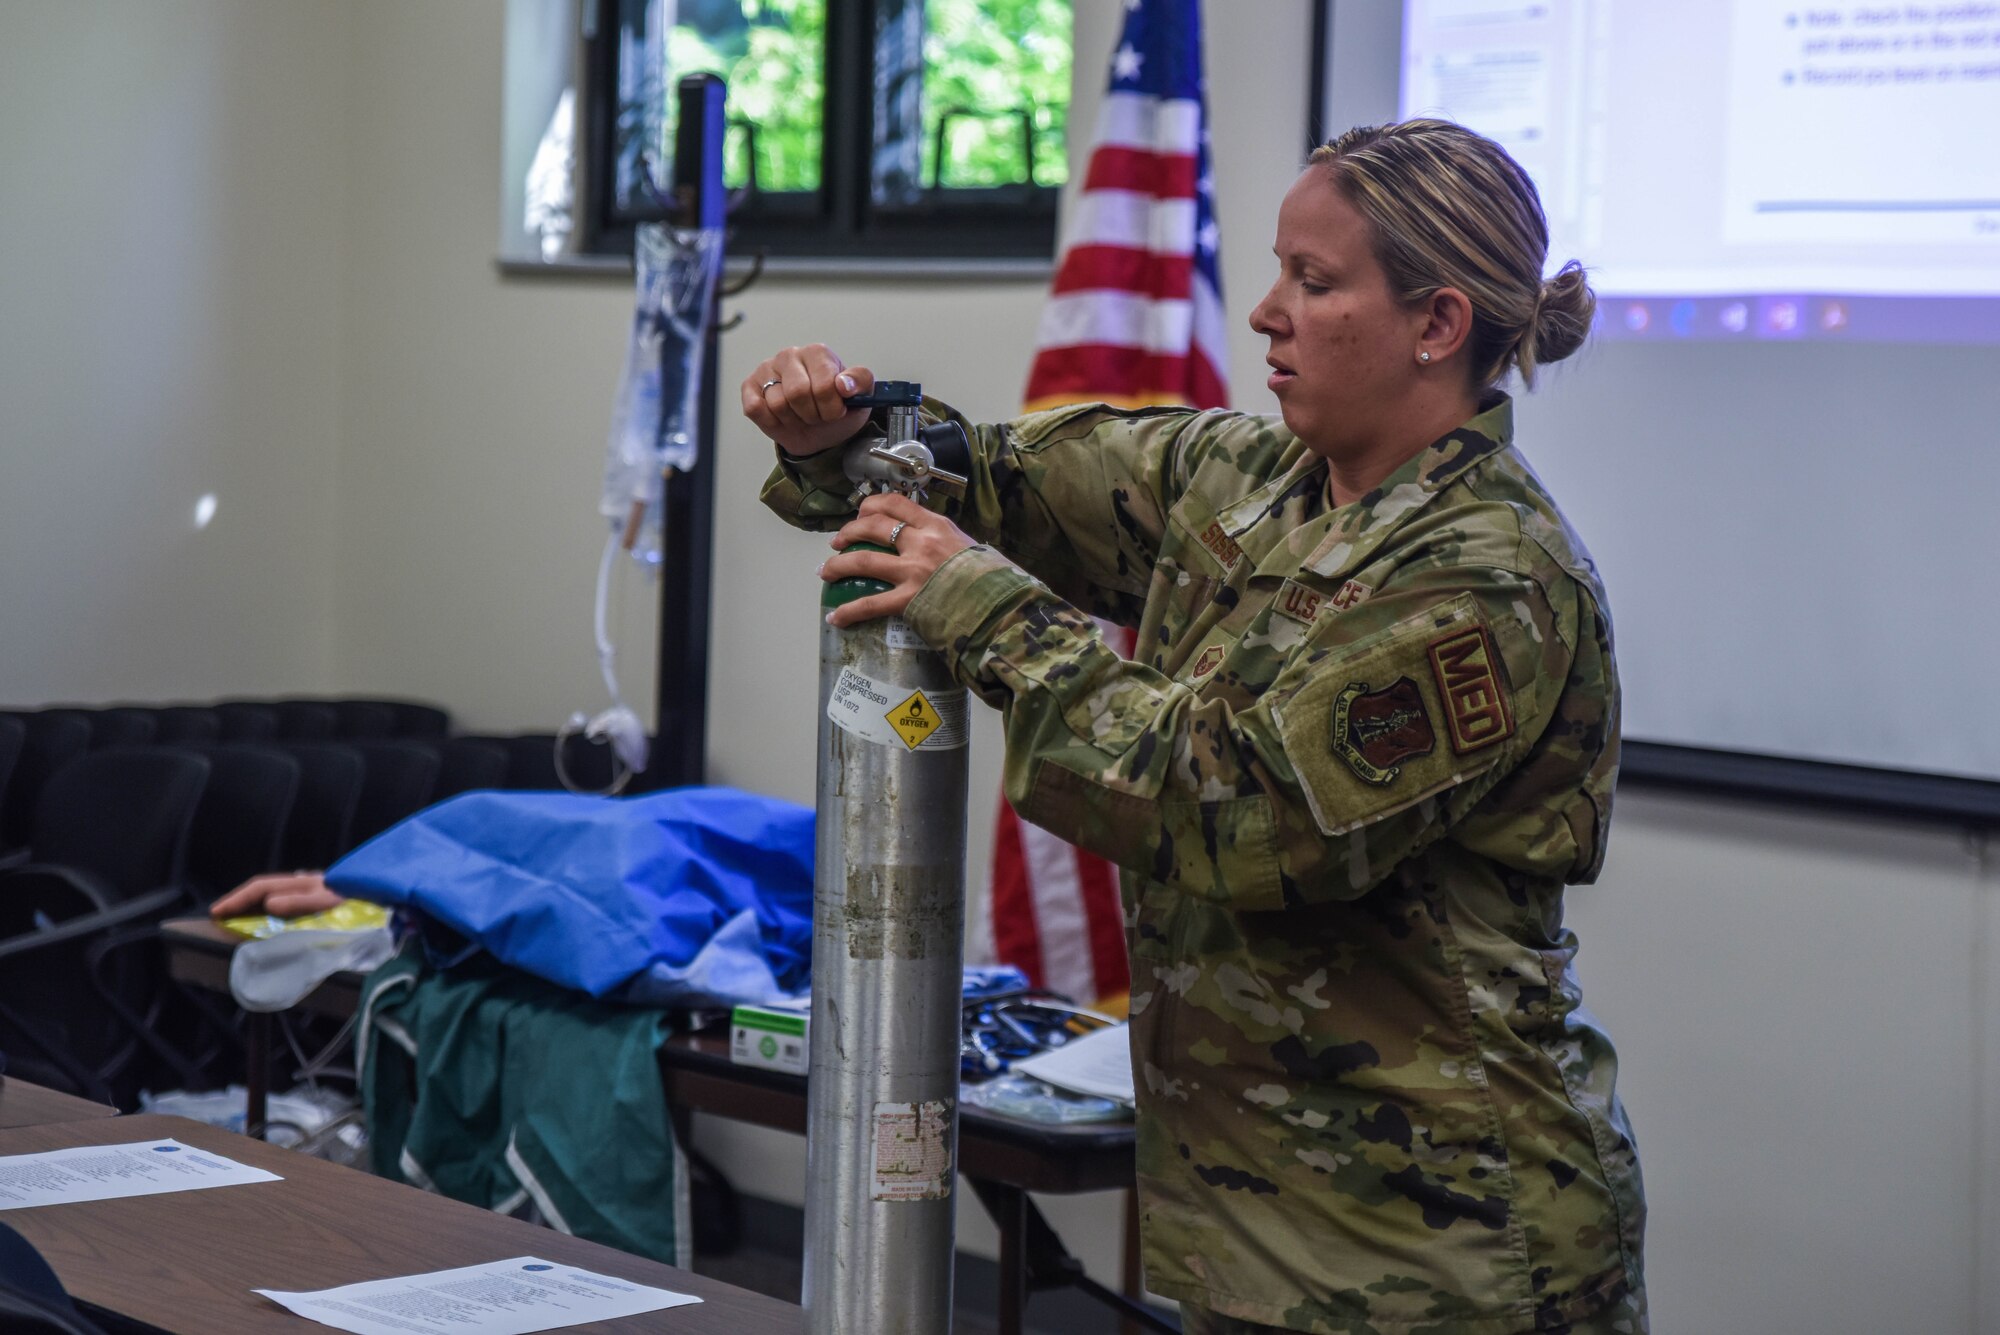 The 114th Medical Group utilized the Medic-X program as part of their Multi Capable Airman training for non-clinical medical personnel to develop relevant life sustaining skills.